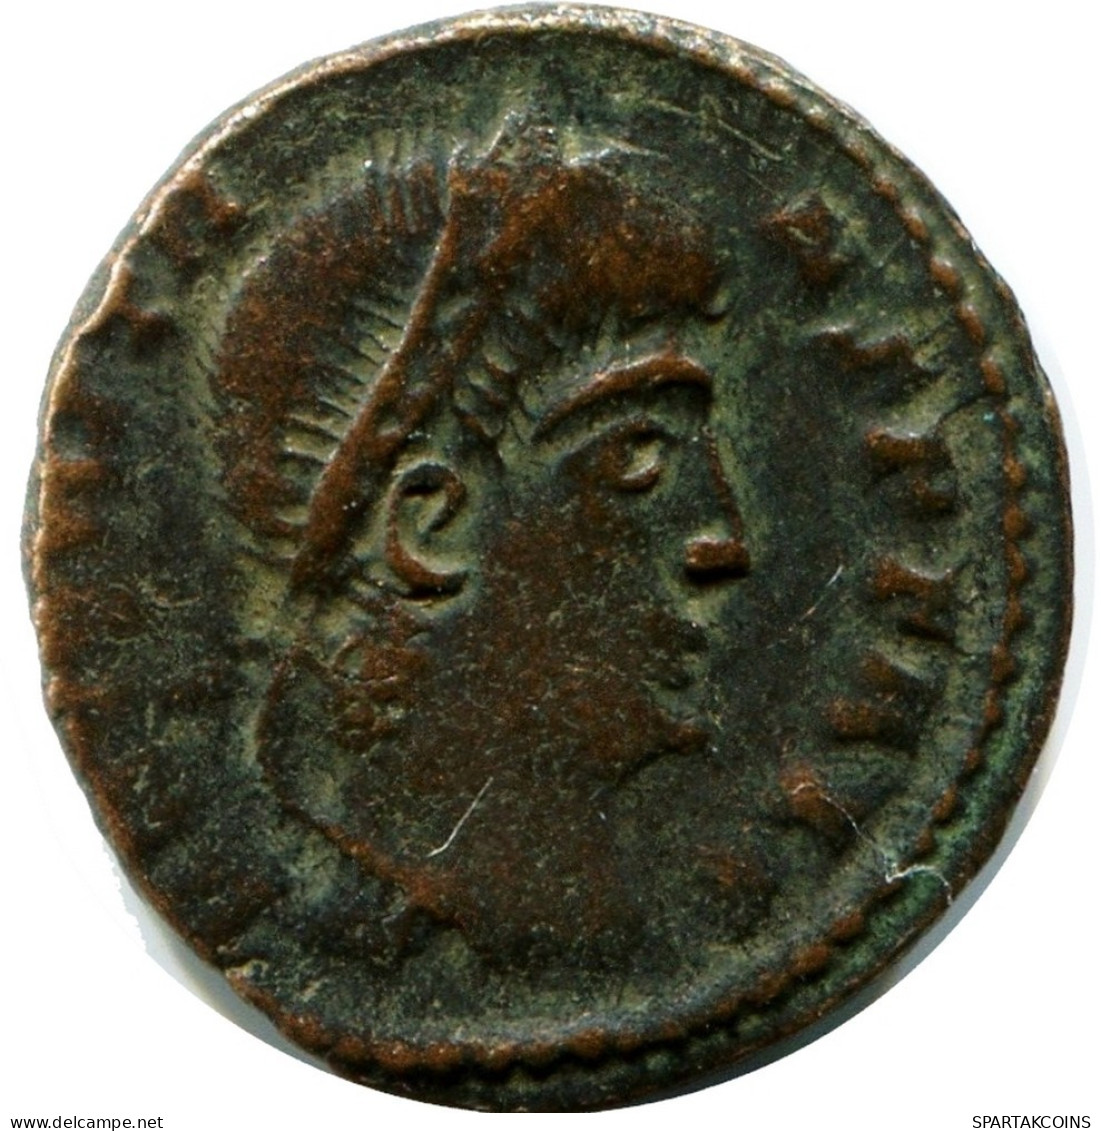 CONSTANS MINTED IN CYZICUS FOUND IN IHNASYAH HOARD EGYPT #ANC11630.14.E.A - The Christian Empire (307 AD Tot 363 AD)